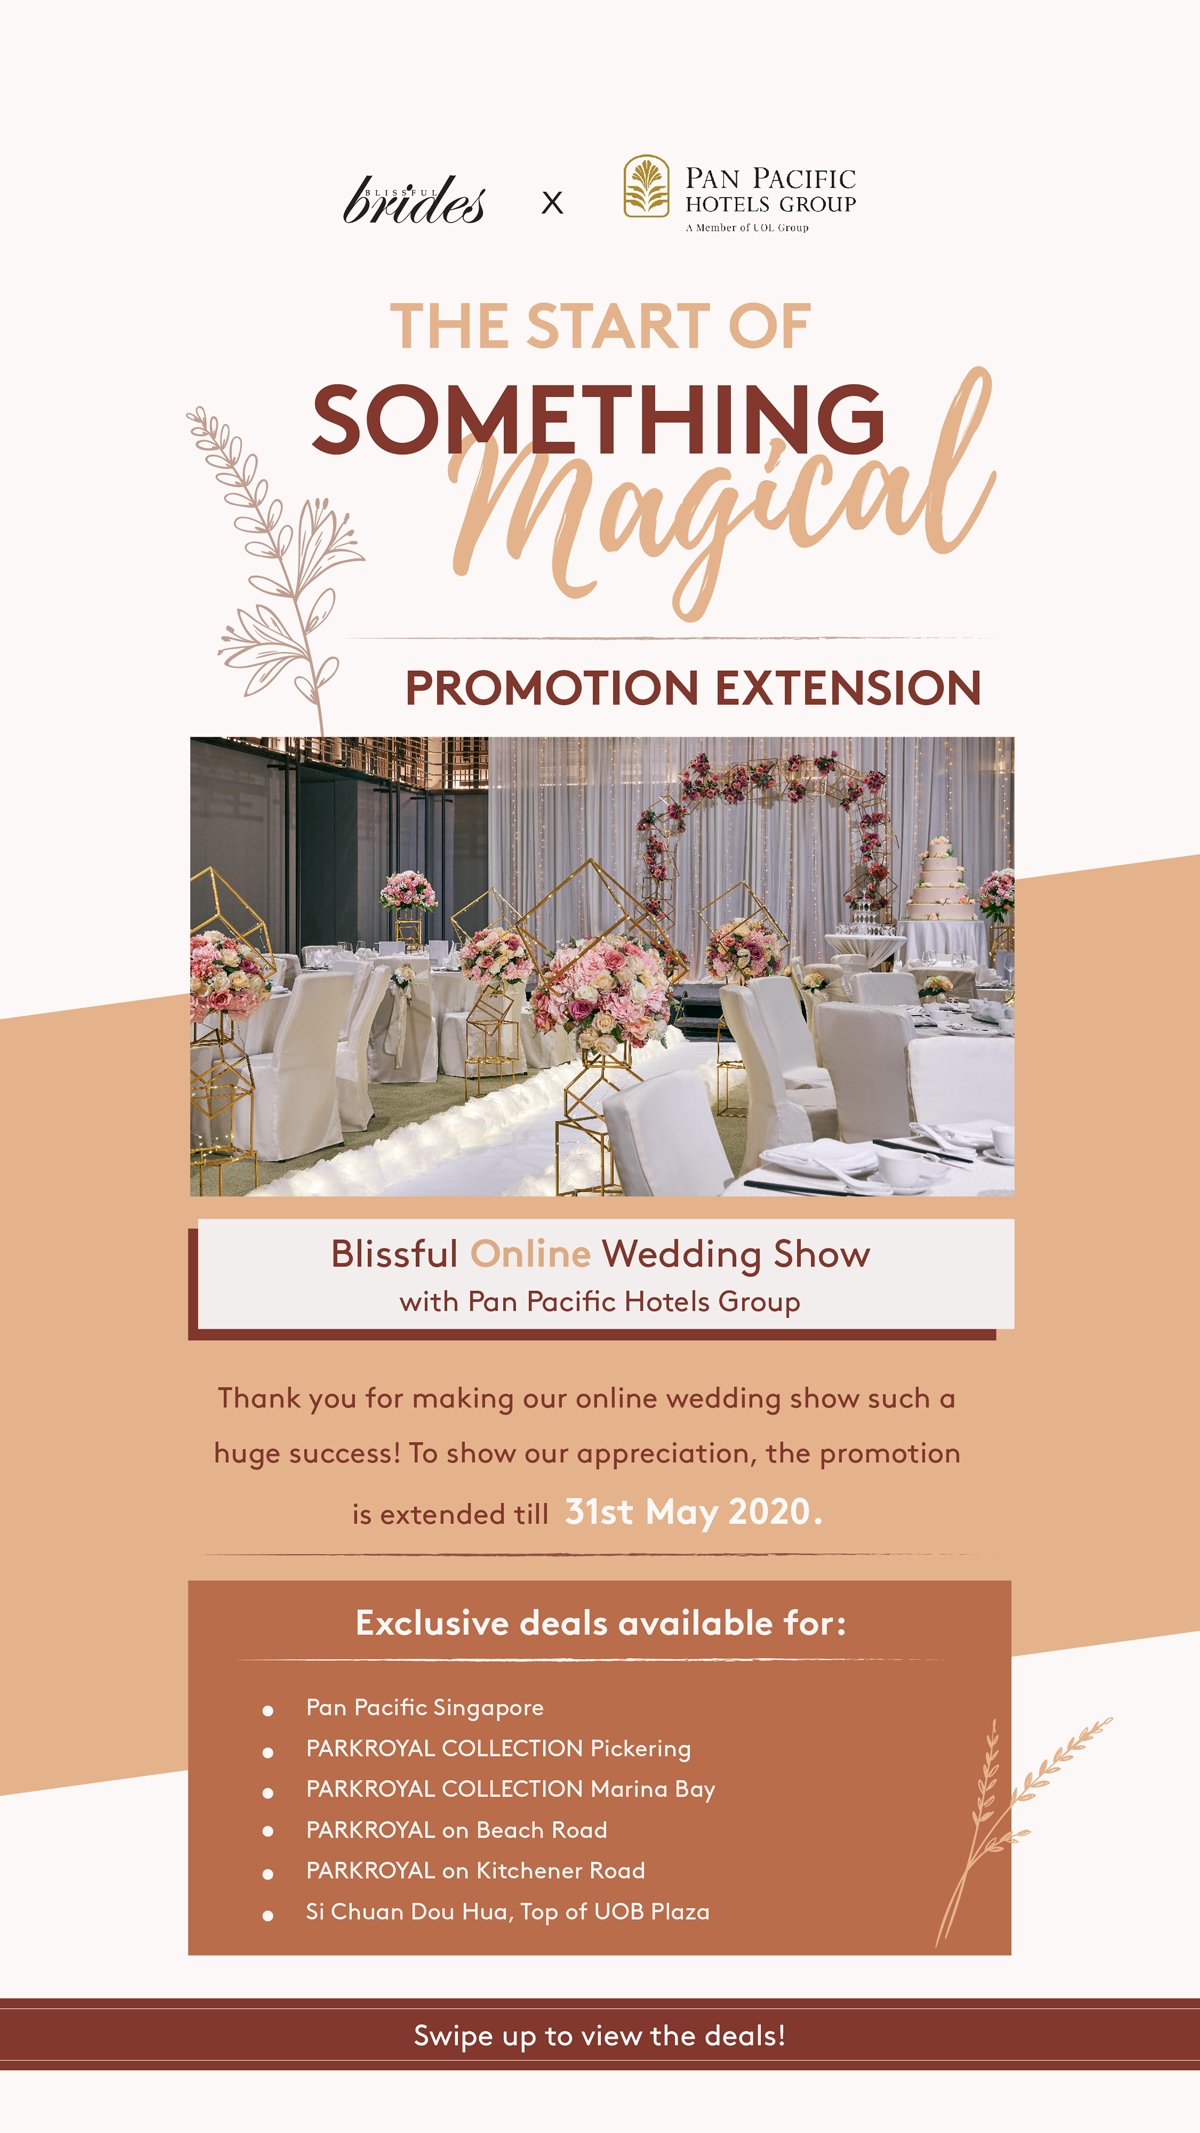 The Start of Something Magical Blissful Online Wedding Show With Pan Pacific Hotels Group